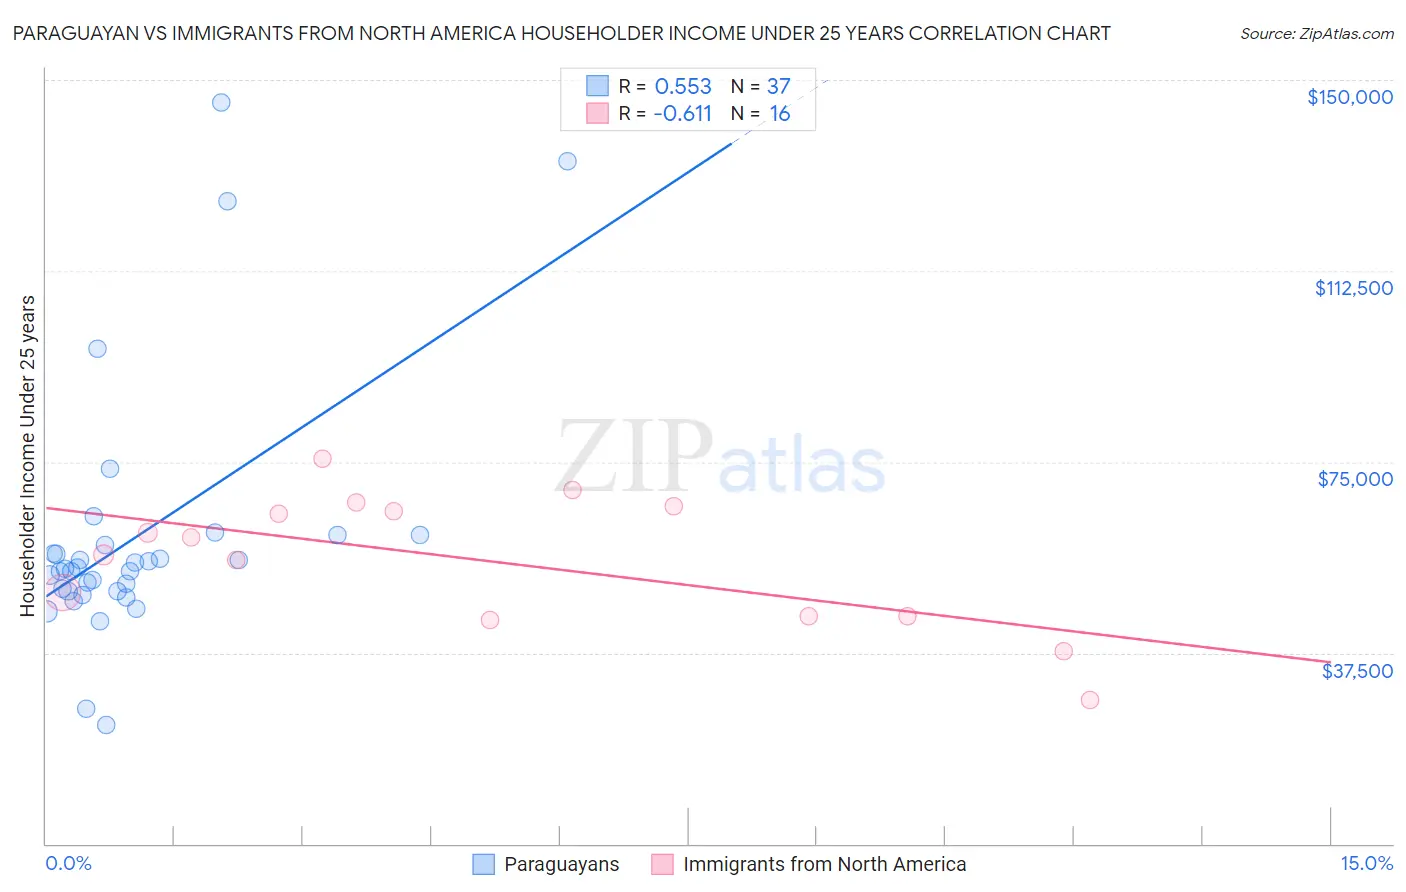 Paraguayan vs Immigrants from North America Householder Income Under 25 years